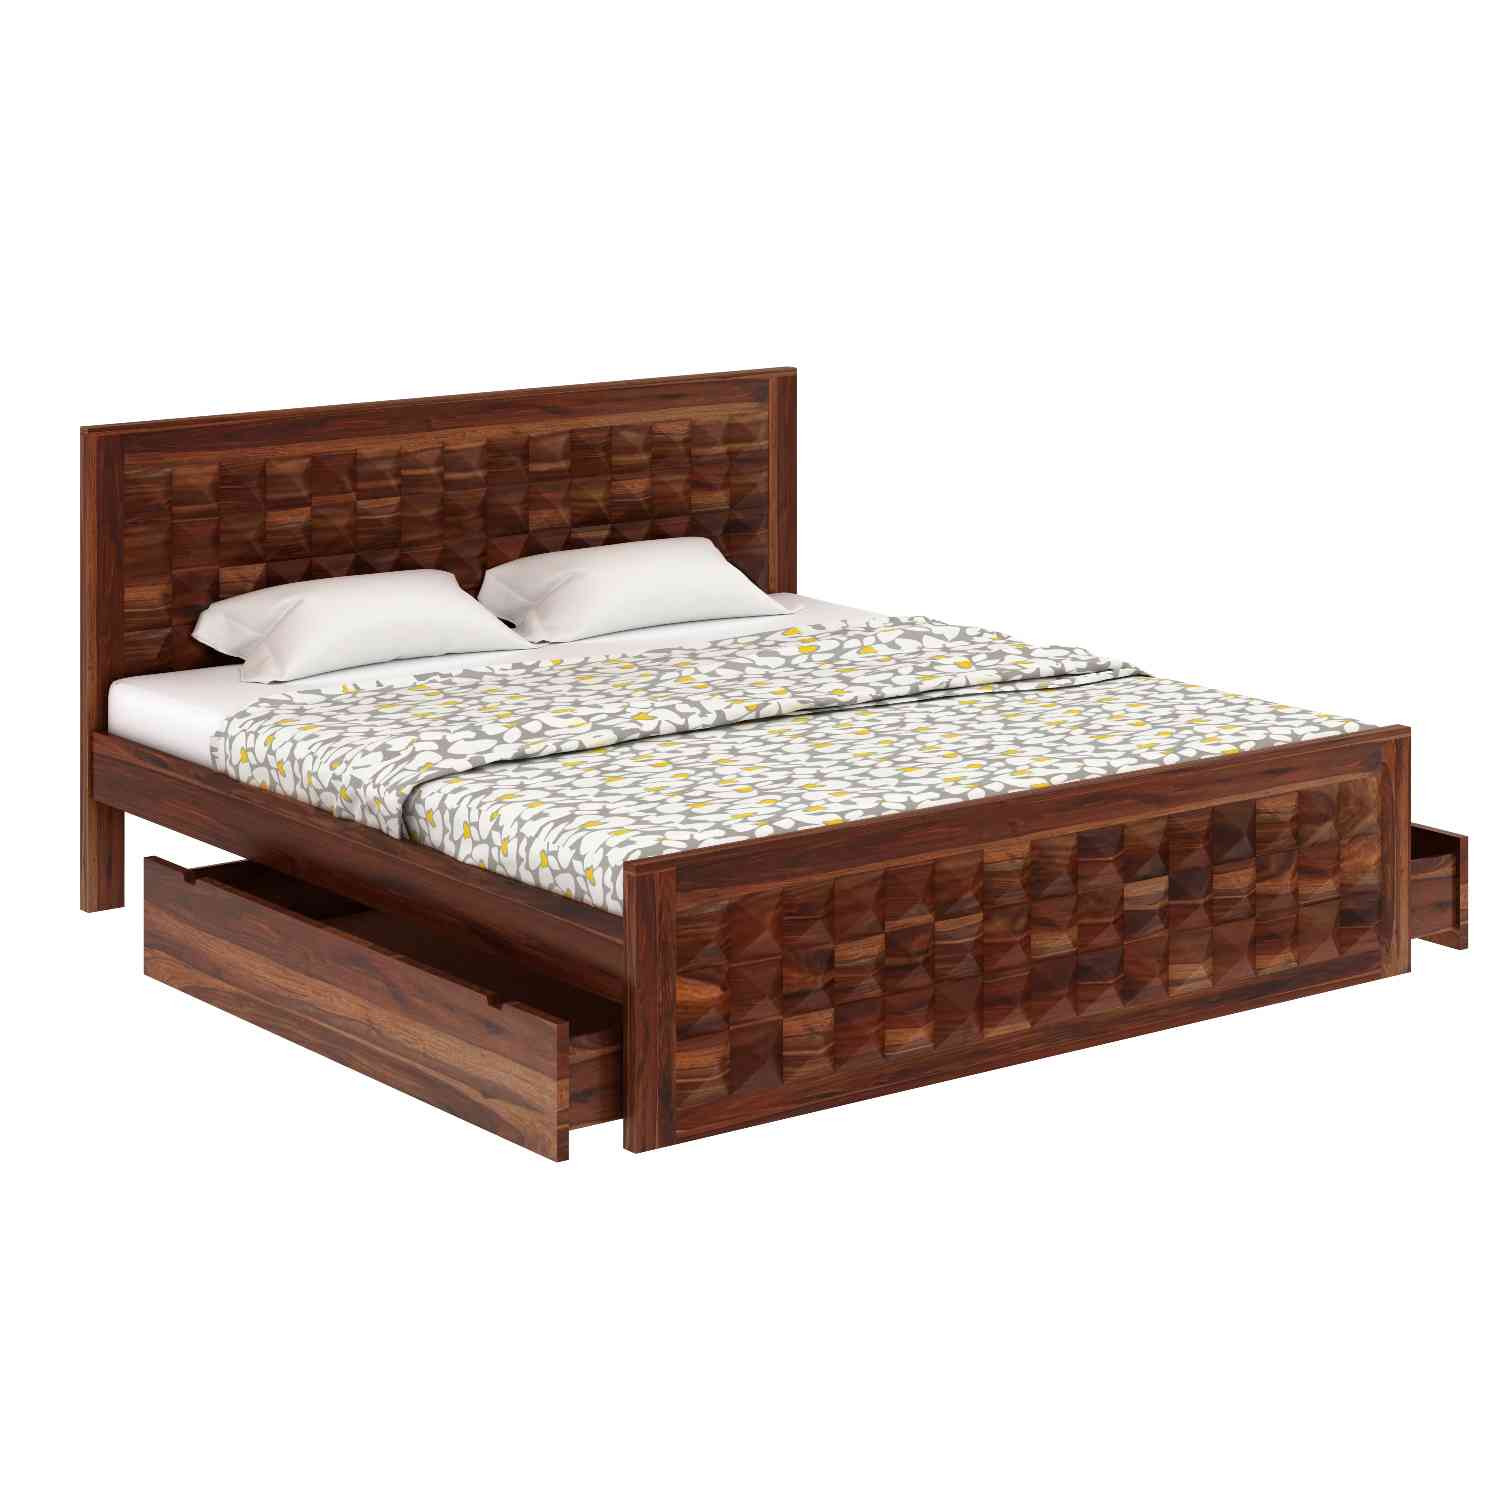 Sofia Solid Sheesham Wood Bed With Two Drawers (Queen Size, Natural Finish)